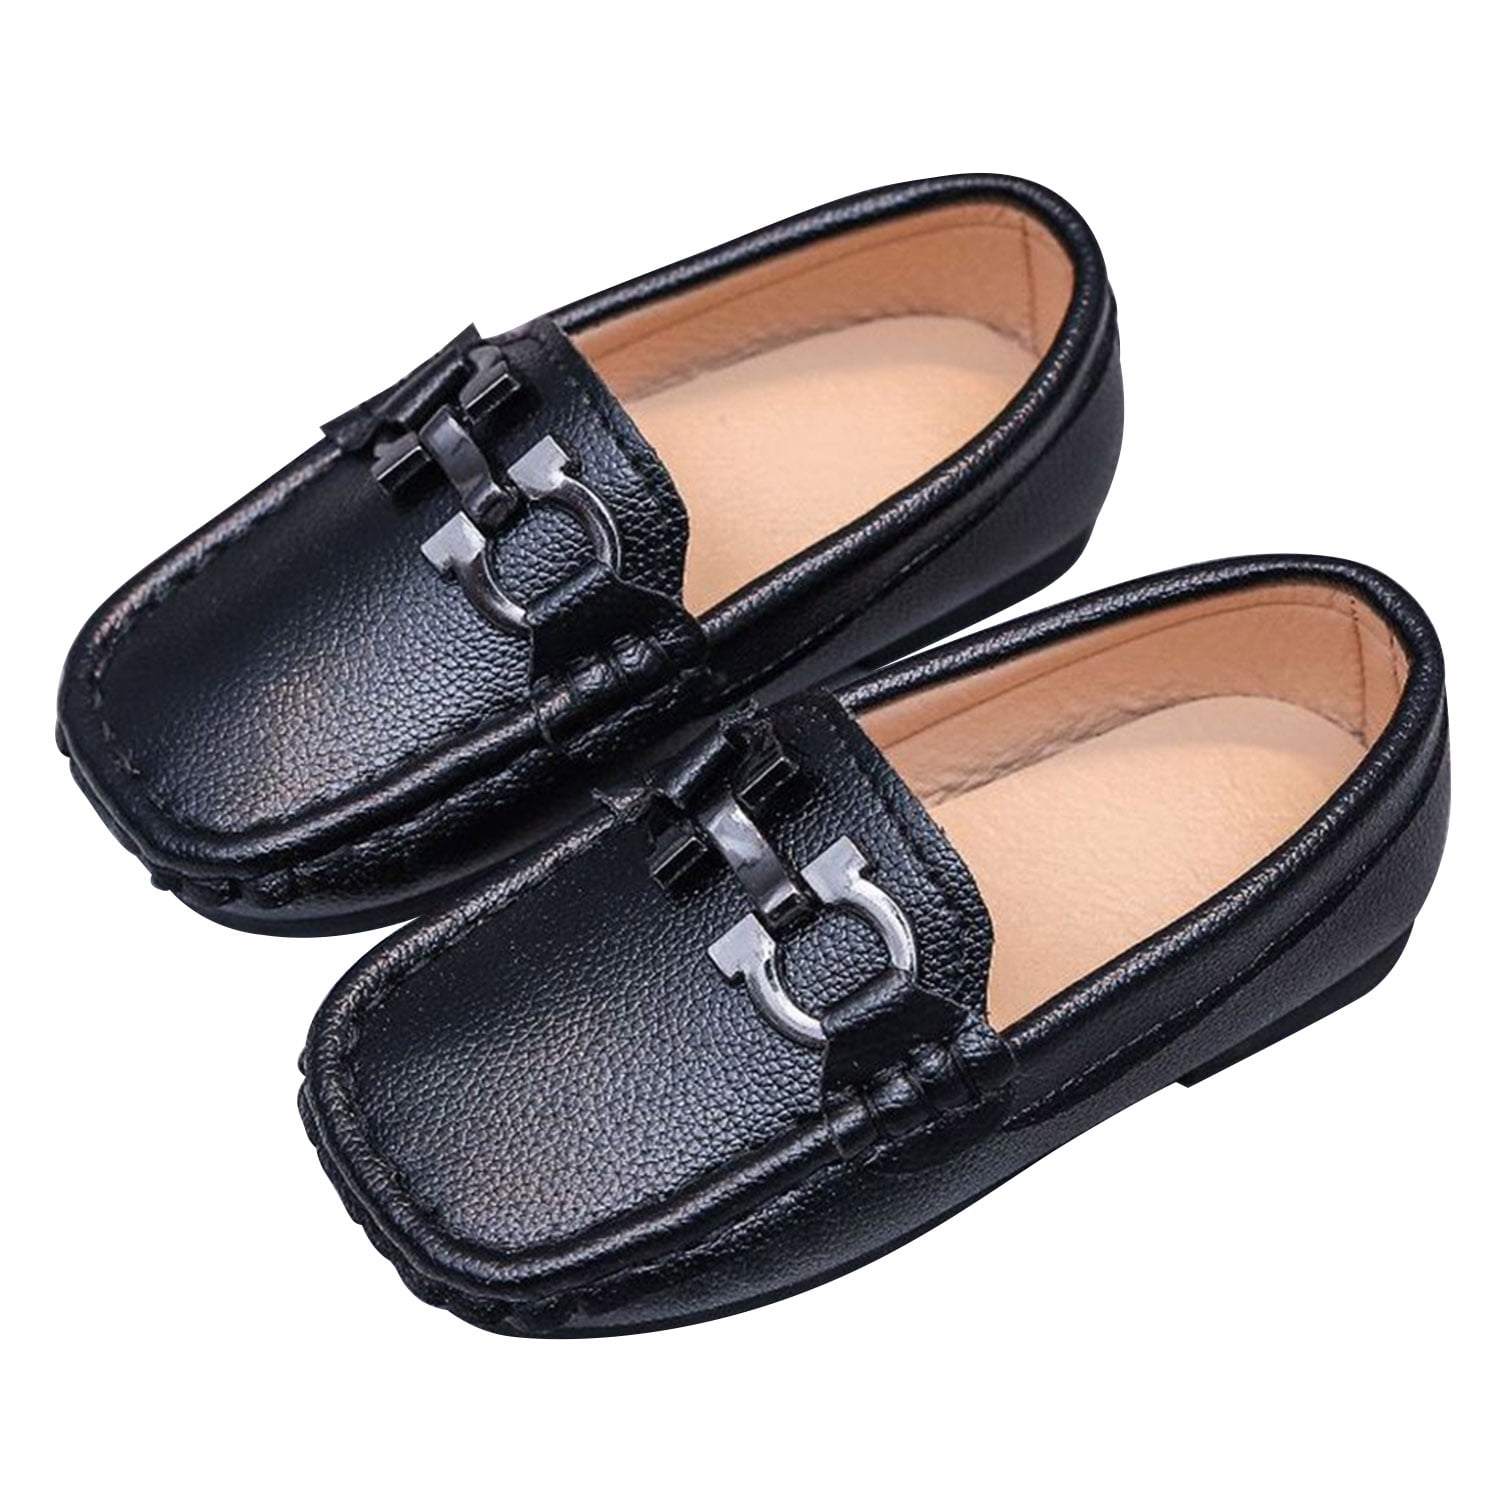 Bestgift Men's Penny Loafers Moccasin Driving Shoes Slip On Flats